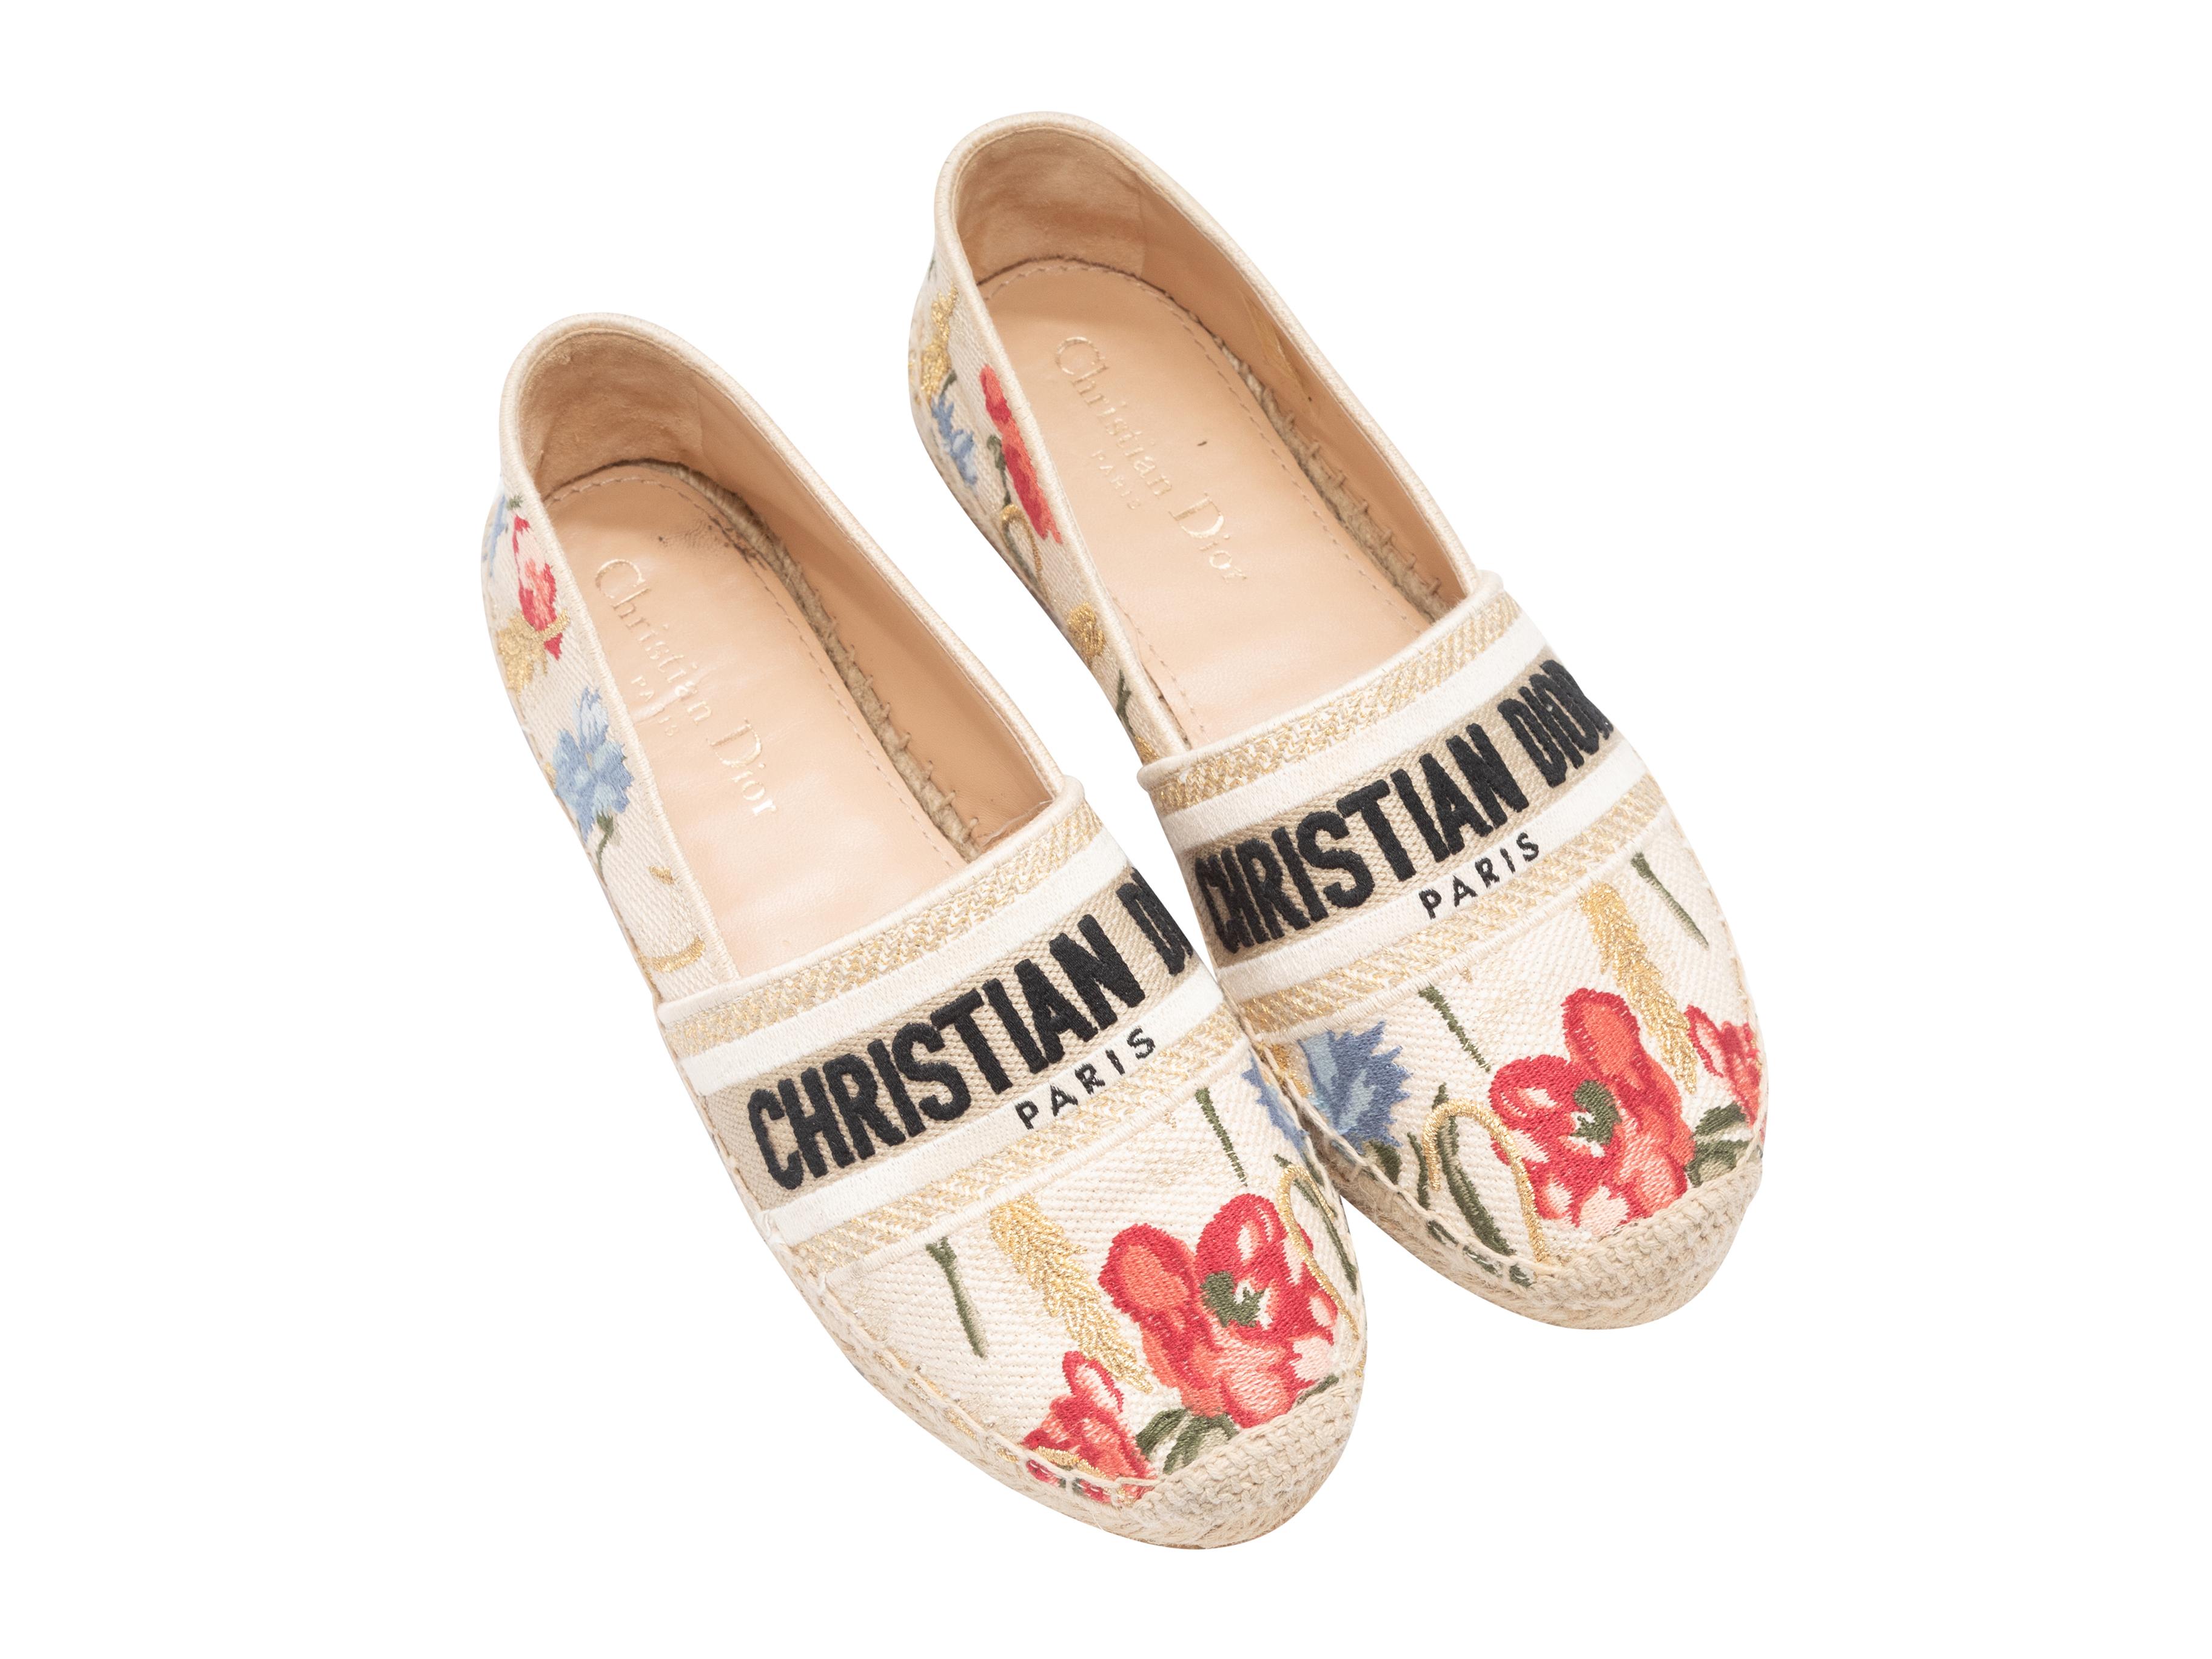 Product Details: Cream and multicolor floral embroidered espadrille flats by Christian Dior. Jute trim at soles. 1